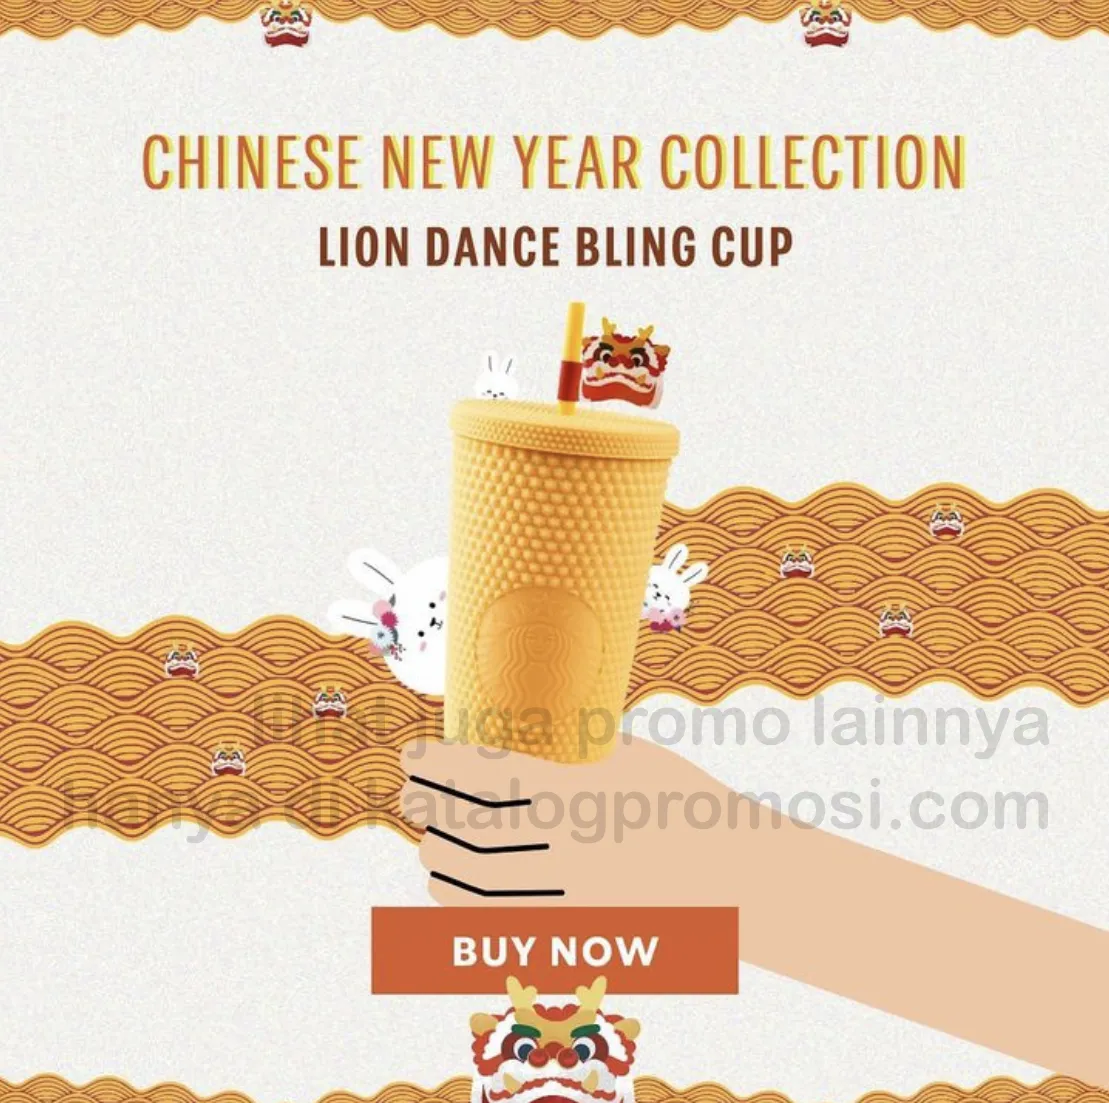 Promo Starbucks NEW Chinese New Year Collection Tumbler Lion Dance Bling Cup